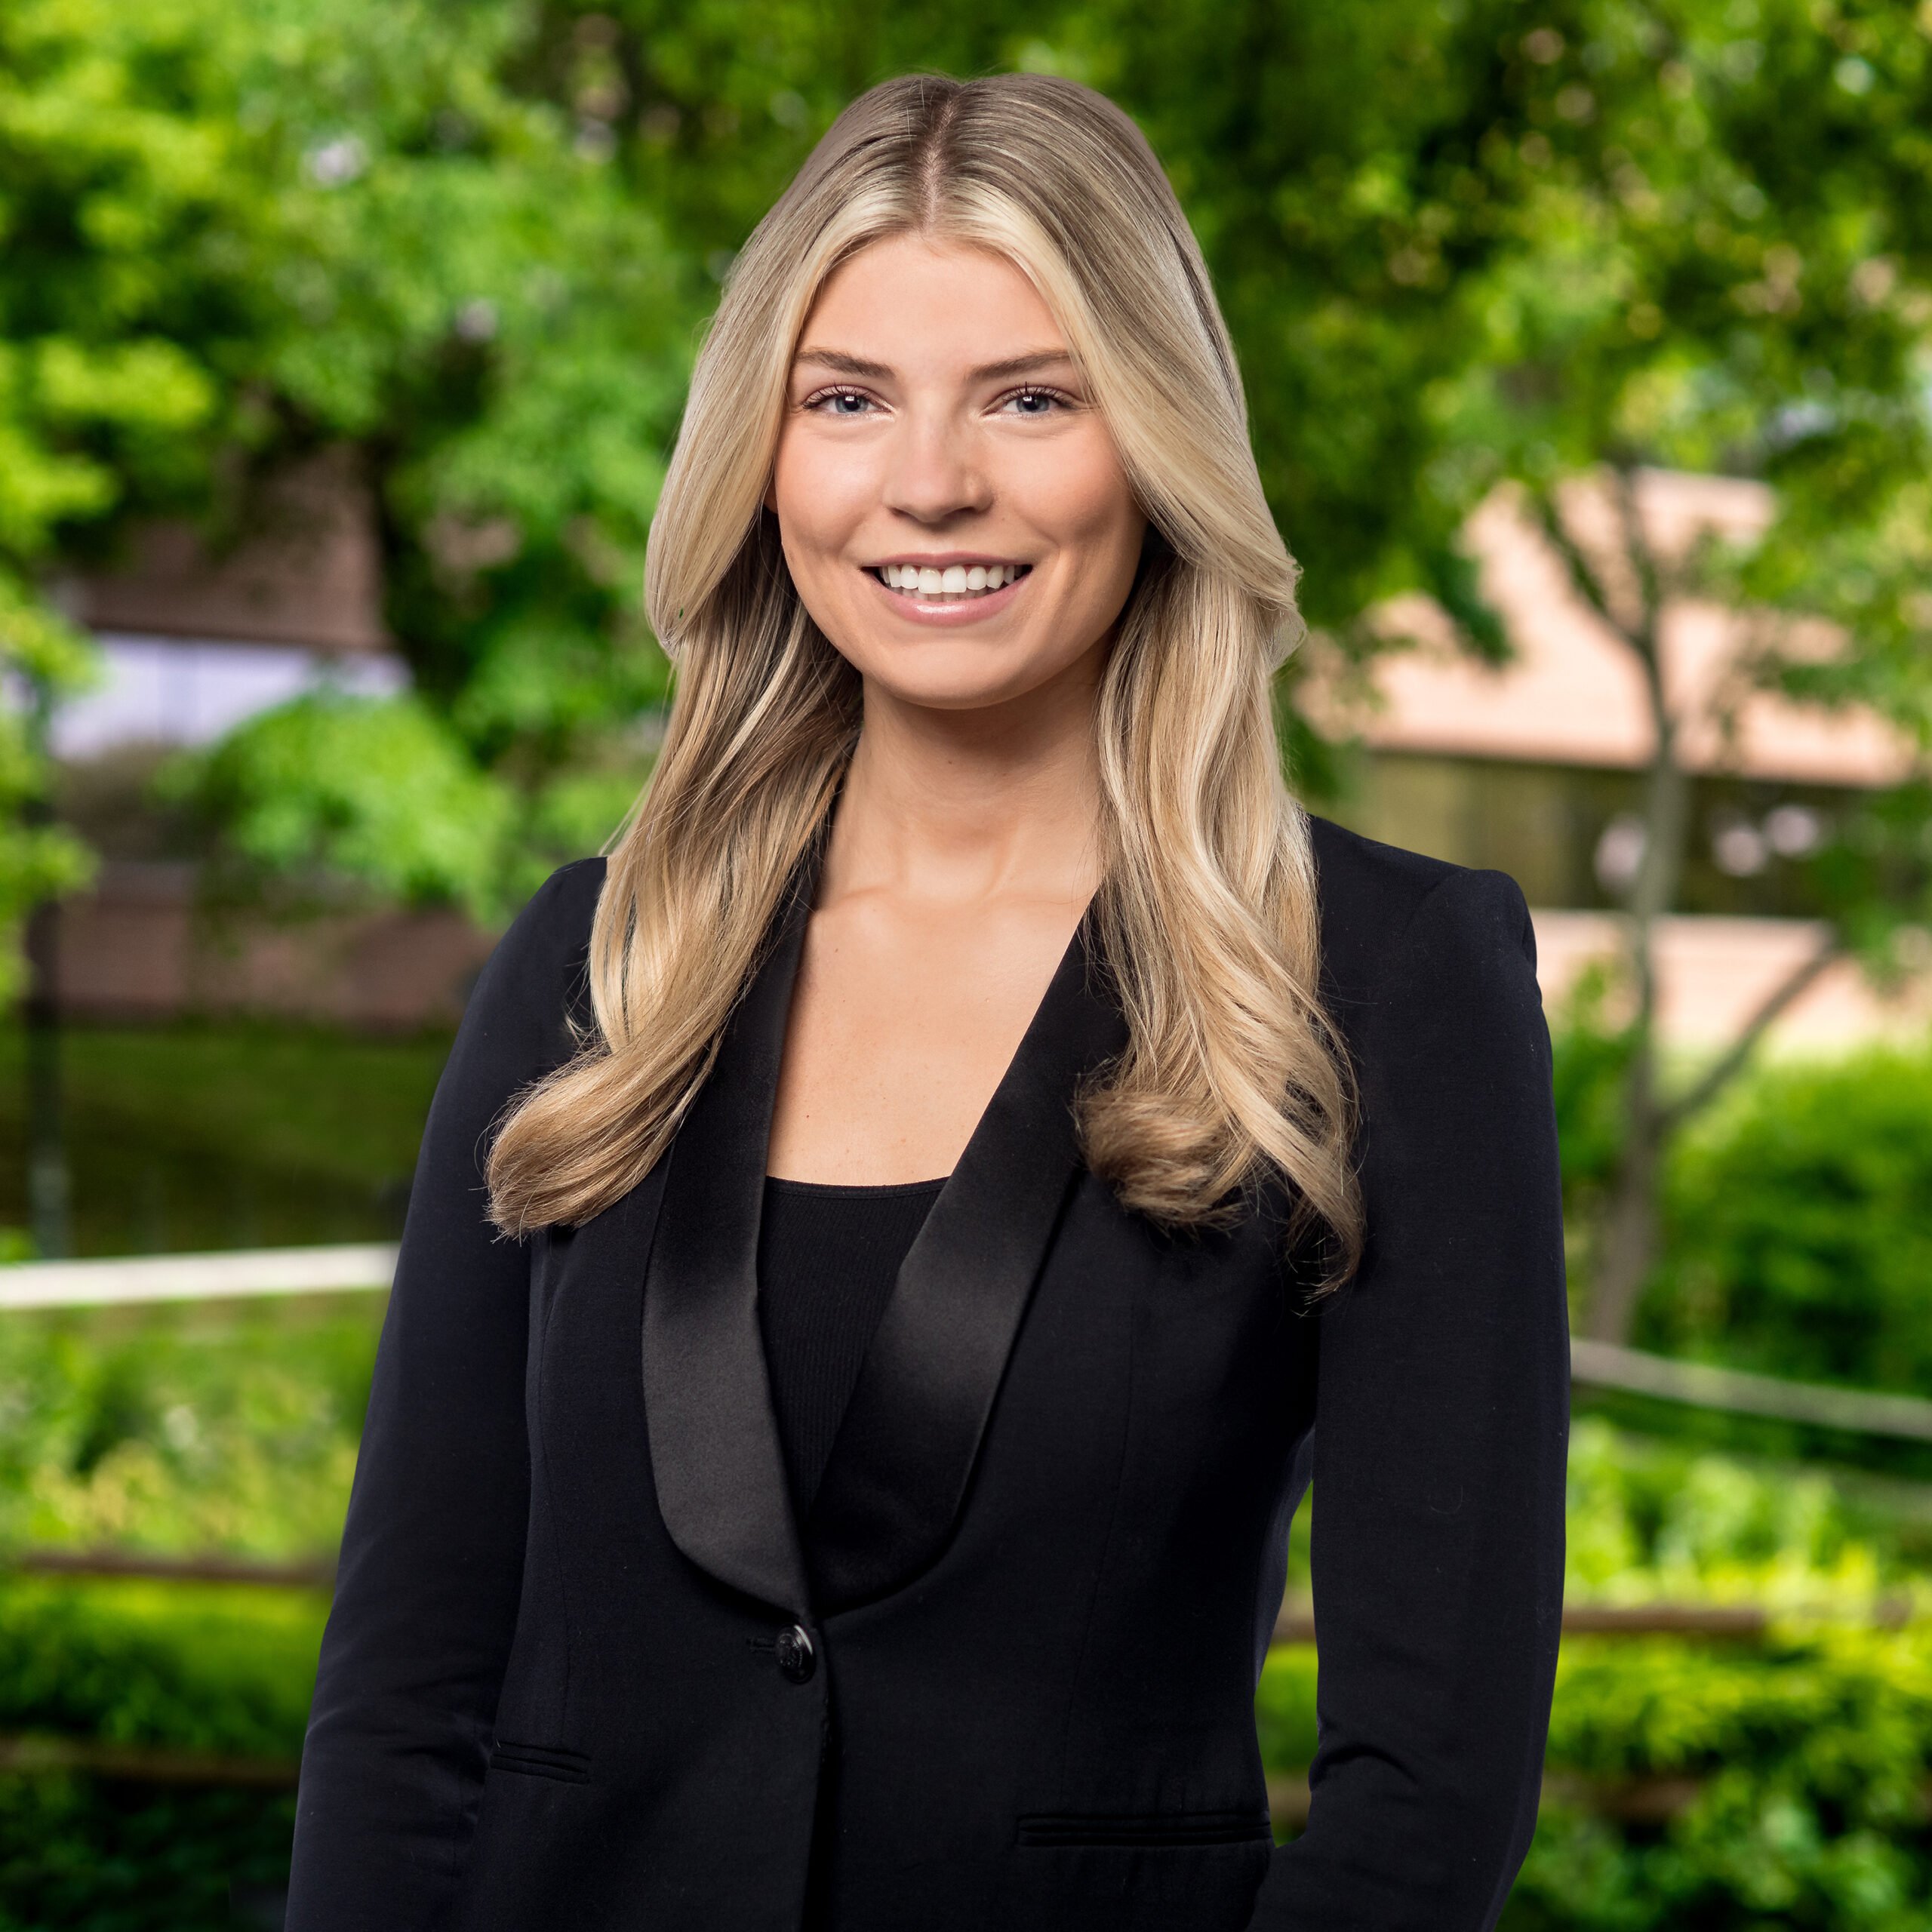 GRACE LADELFA JOINS WCRE’S GROWING PROPERTY MANAGEMENT TEAM